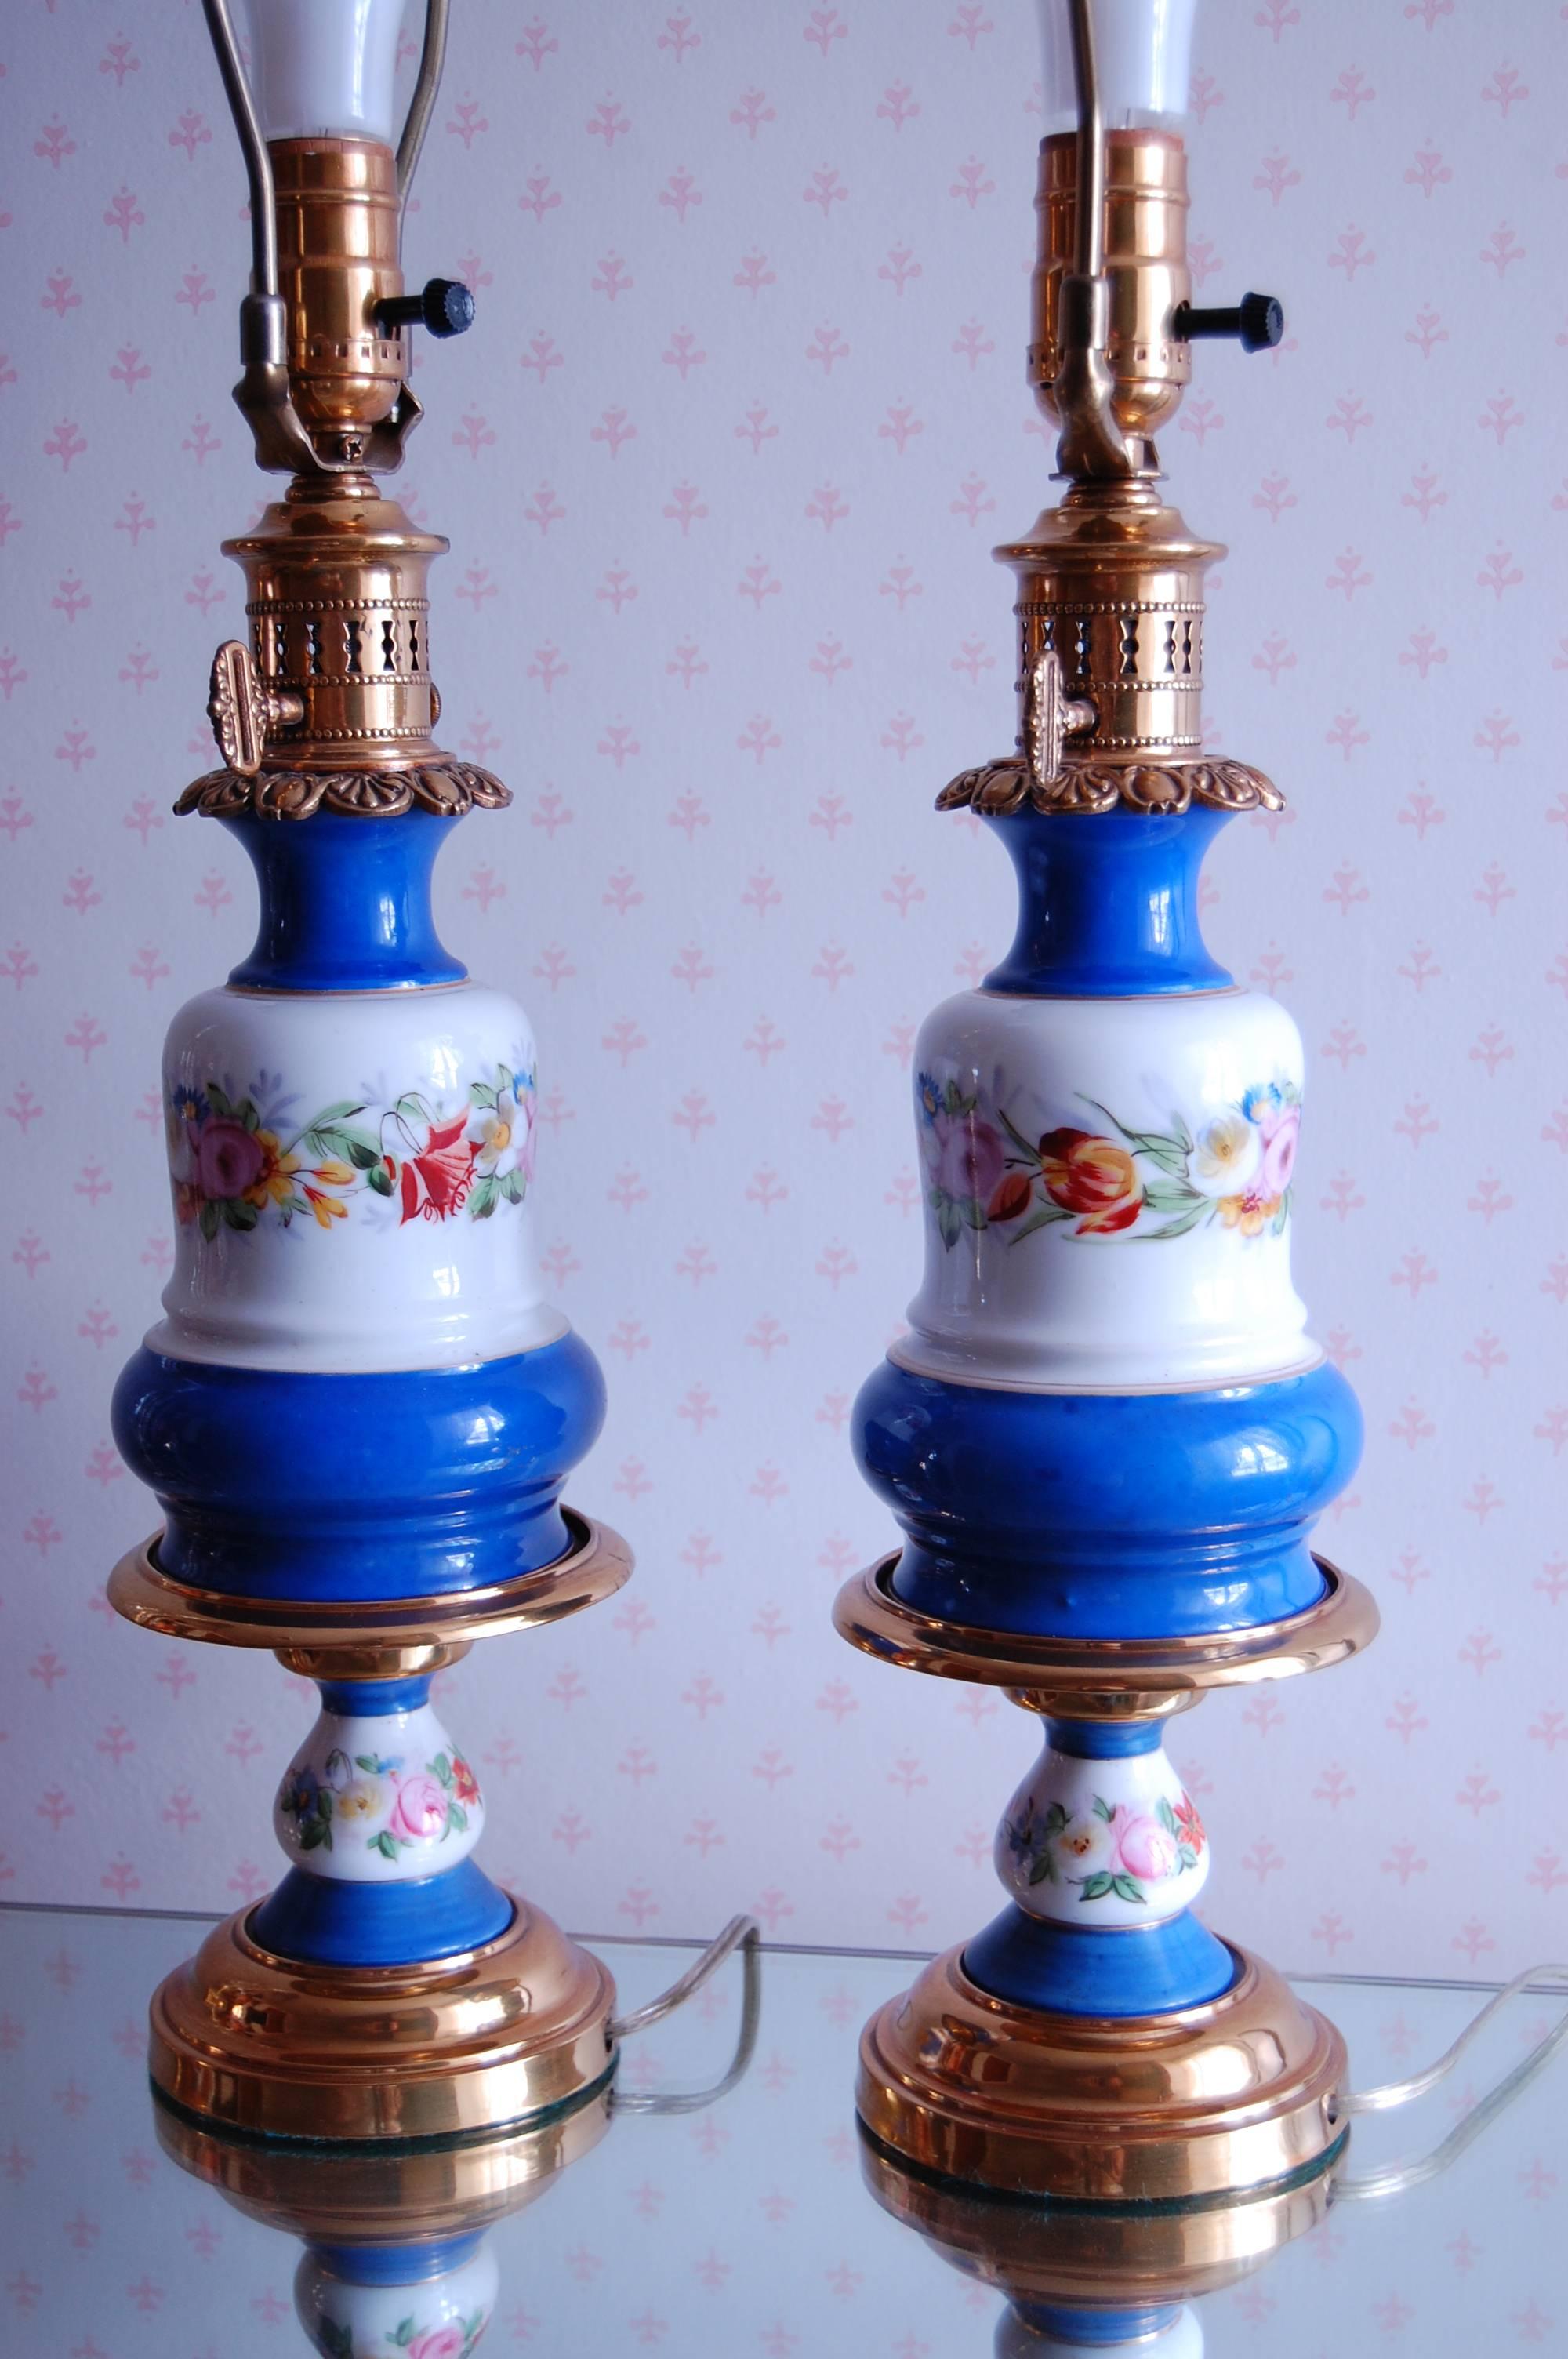 Pair of French oil lamps, circa 1850 with beautiful floral decorations on a white and blue background. It measures 14 inches to the top of the brass burner. Recently rewired with a three way socket, completely cleaned, polished and lacquered.